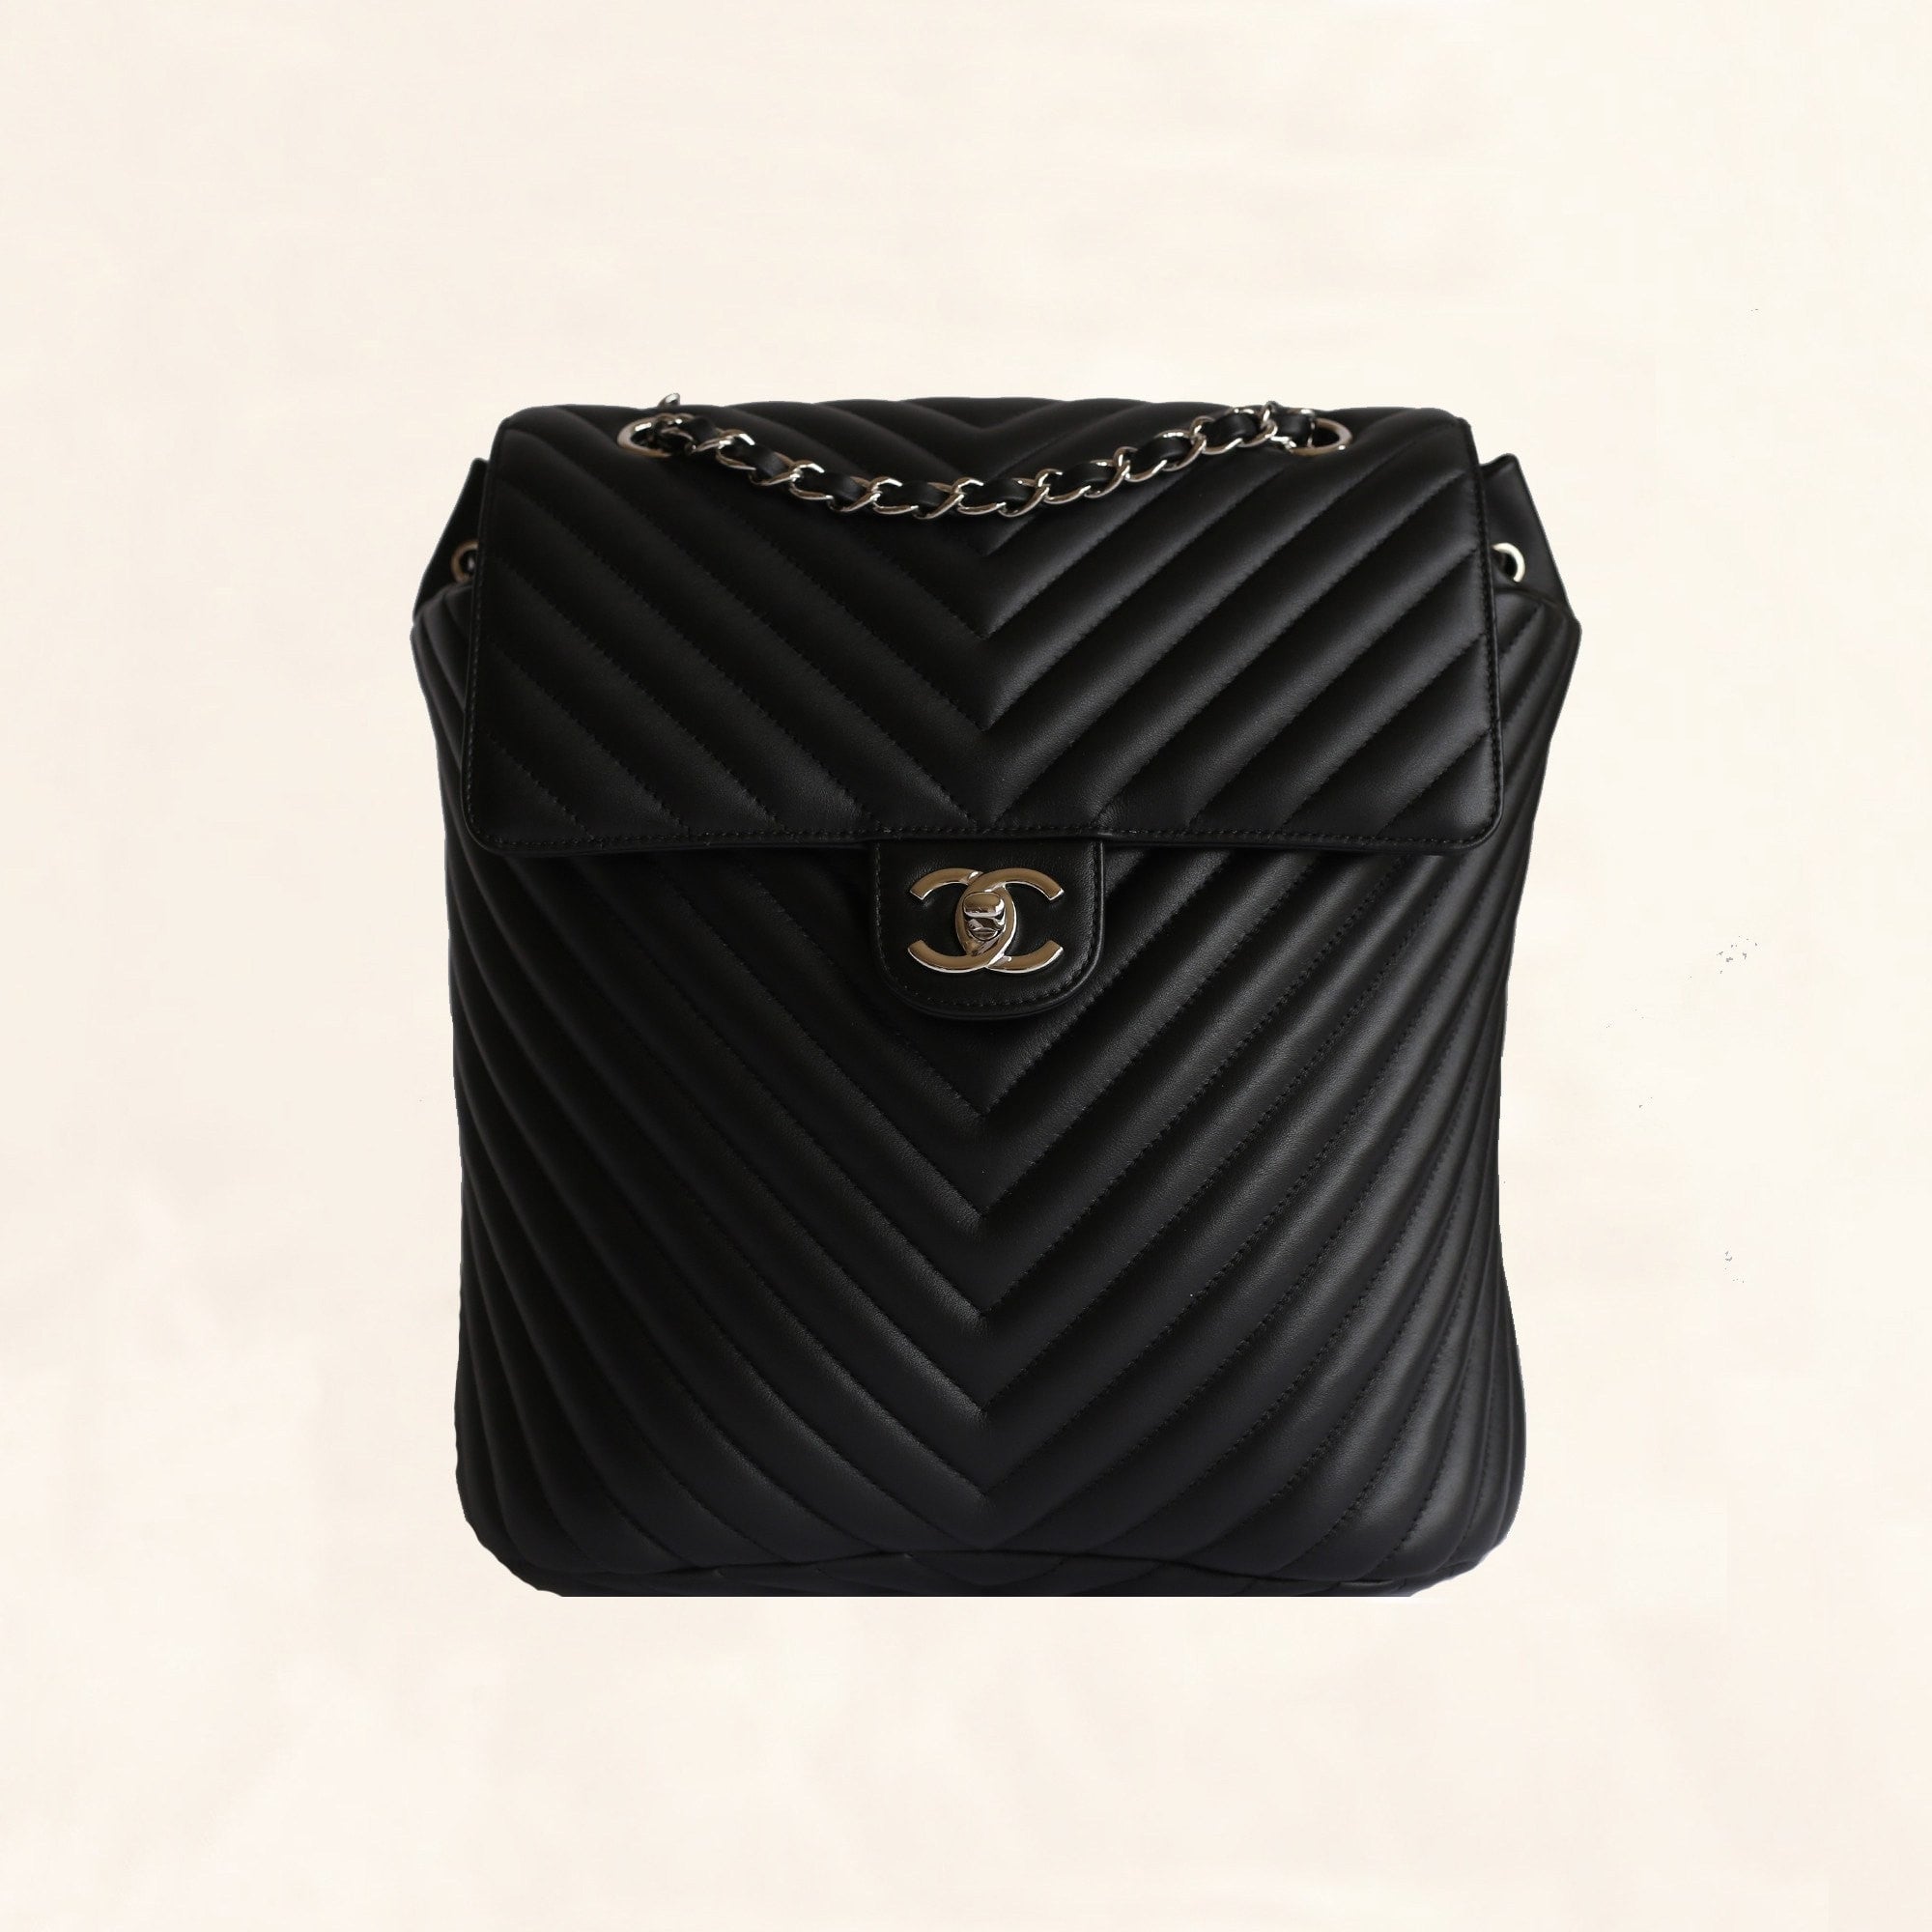 Chanel, Chevron Urban Spirit Backpack with Silver Hardware